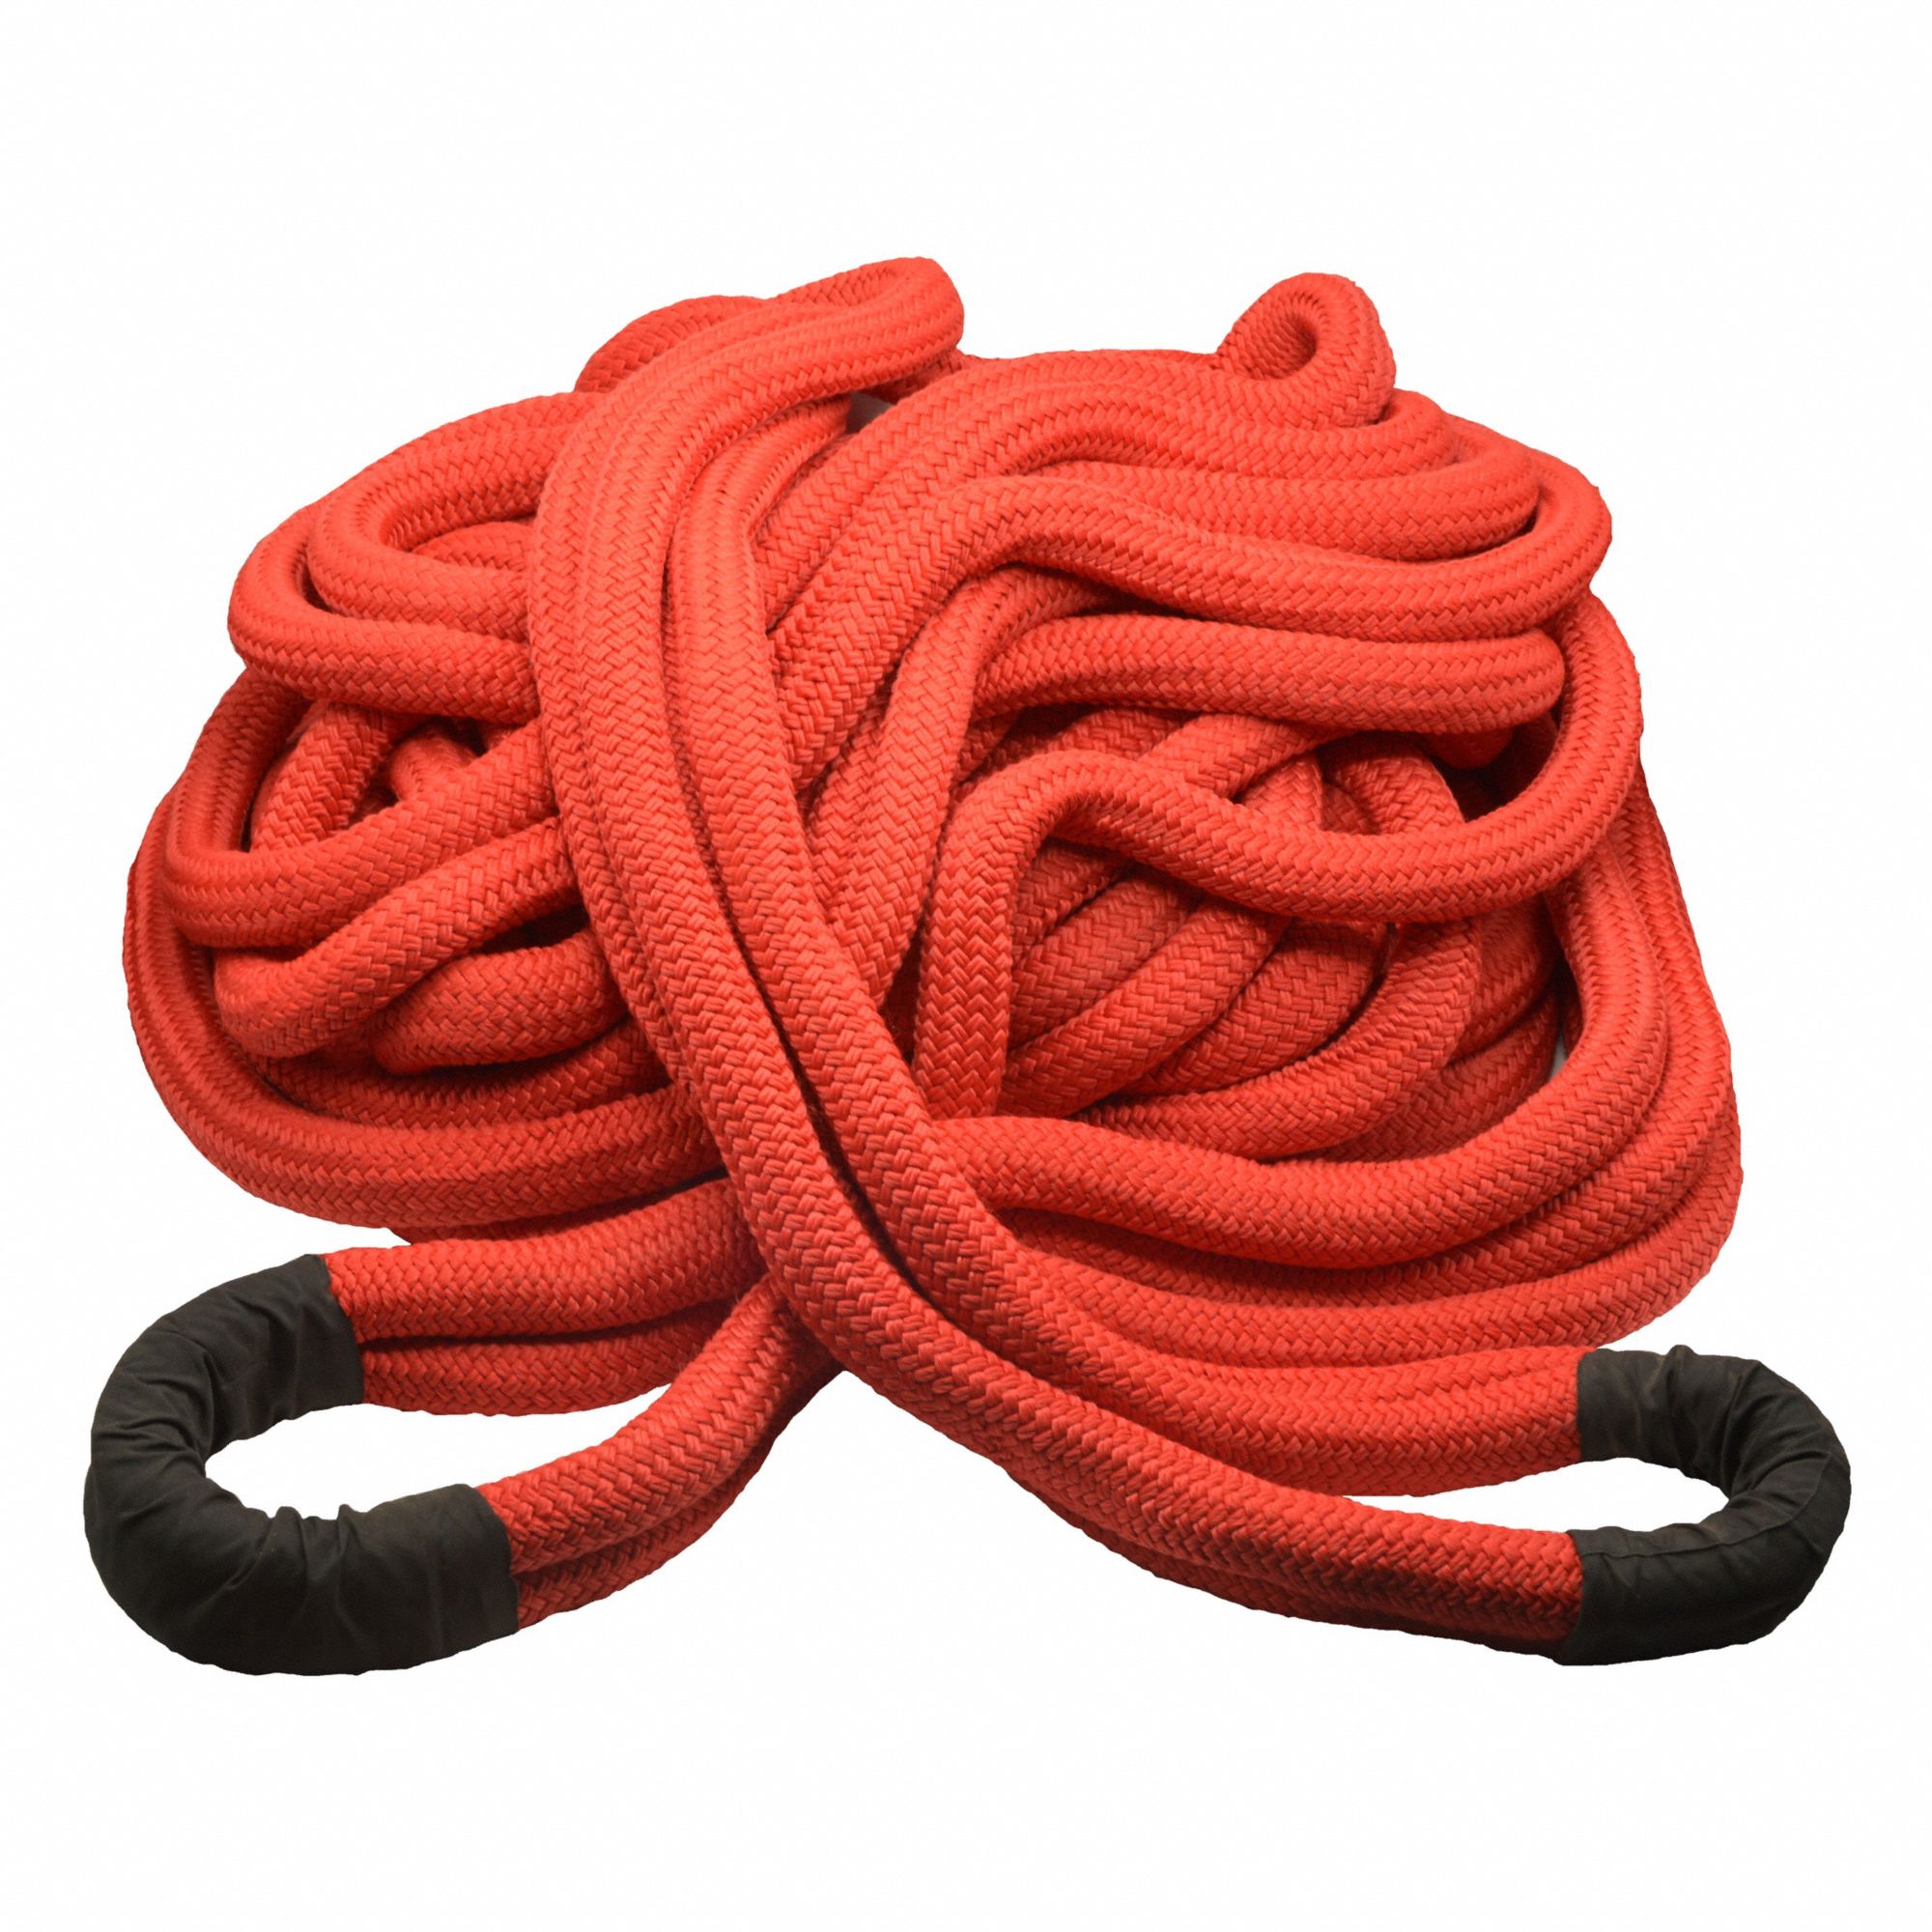 Recovery Rope: 30 ft Lg, 1 in Dia, Nylon, Loop, Nylon, Red, Includes Storage Bag